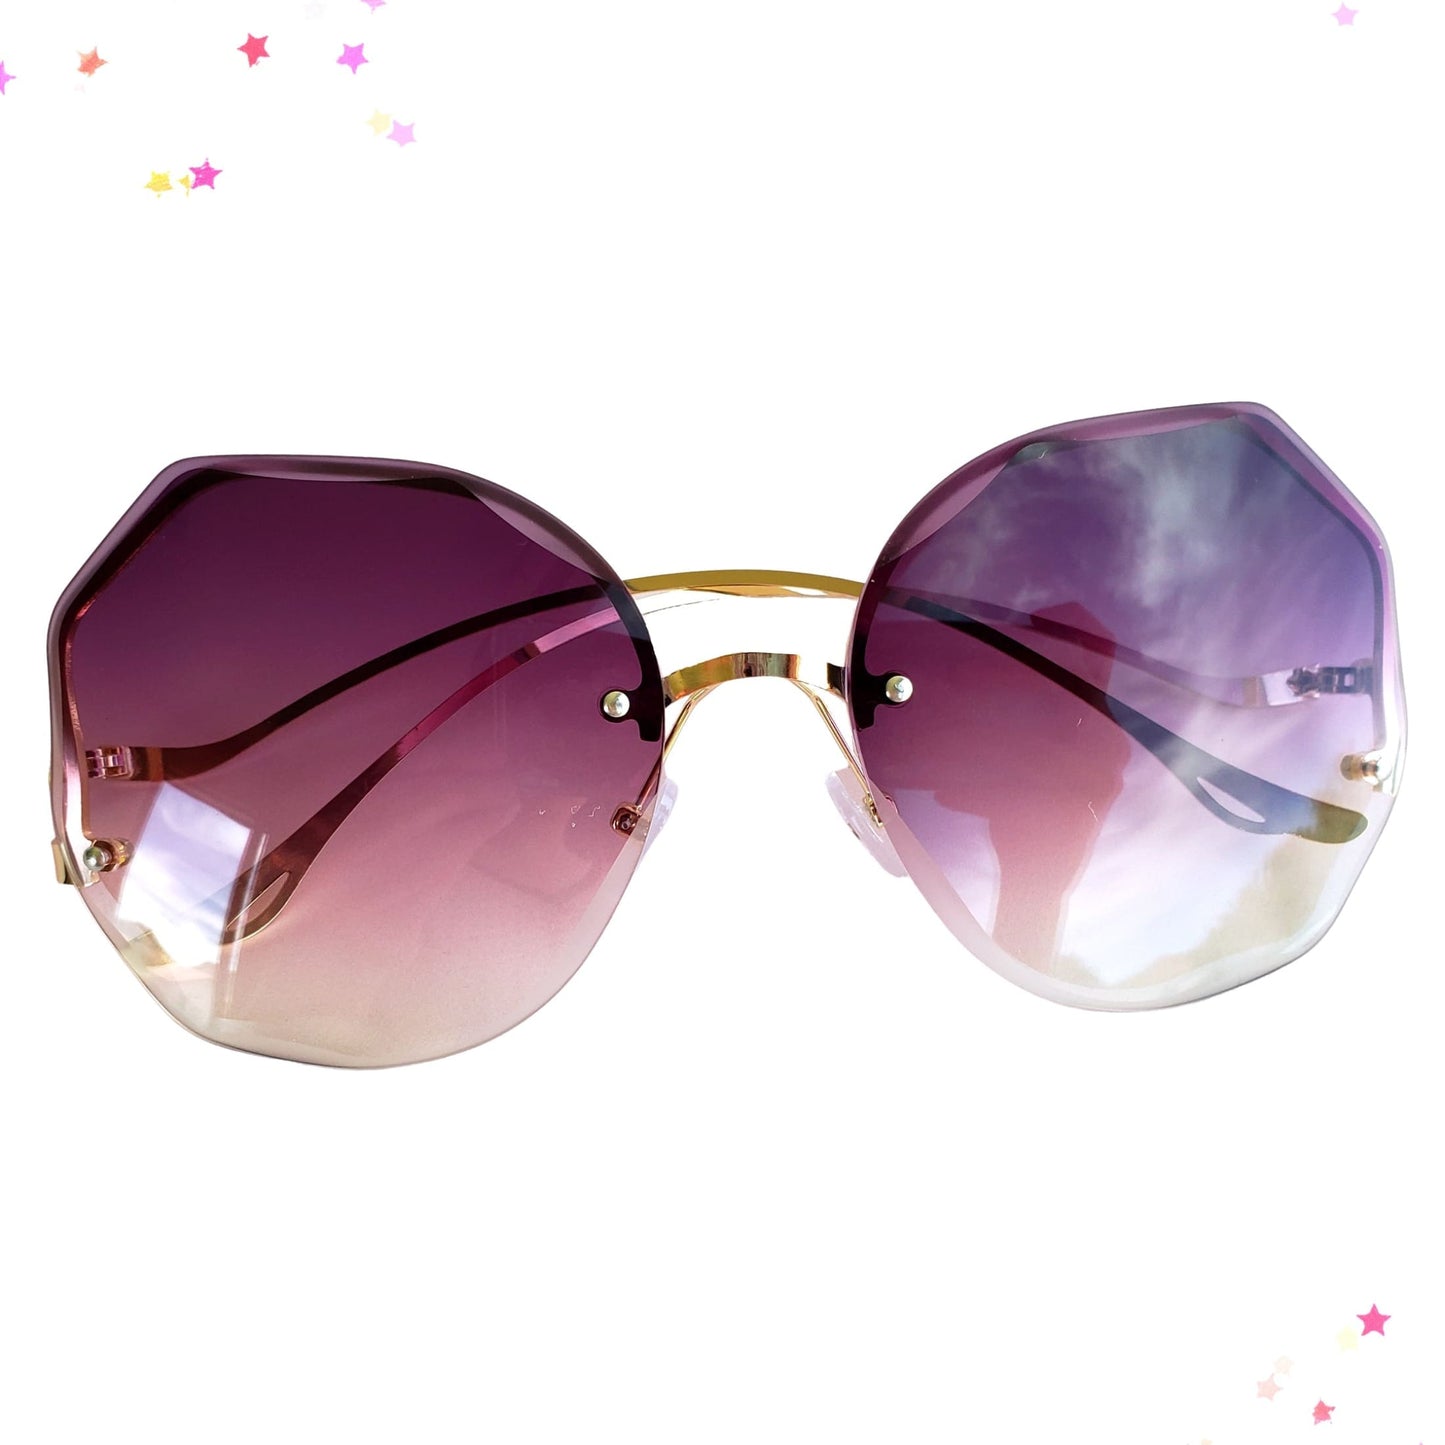 Iconic Sunglasses in Orchid from Confetti Kitty, Only 12.99